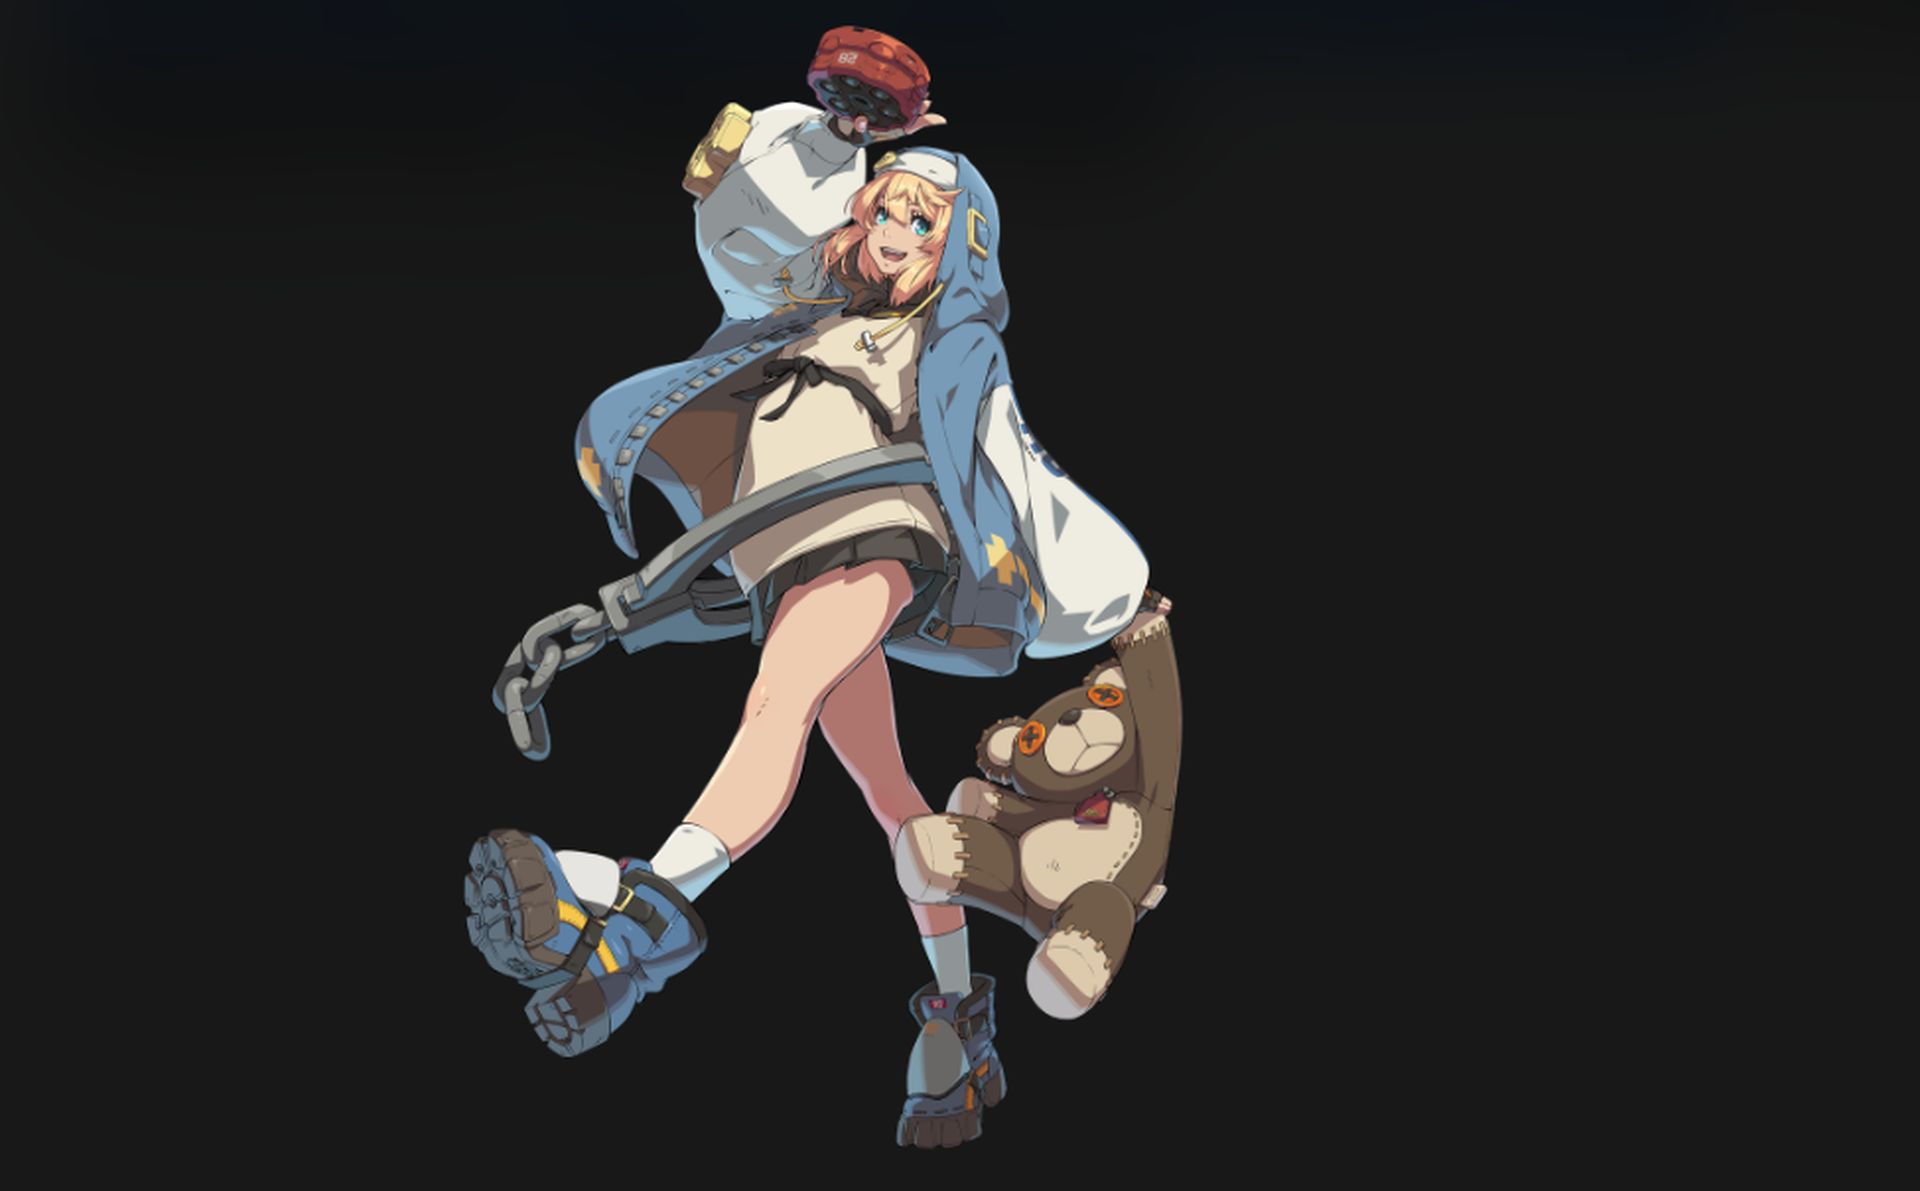 Guilty Gear Strive Season Pass 2's release date and its first DLC character, Bridget, were both announced by Arc System Works.